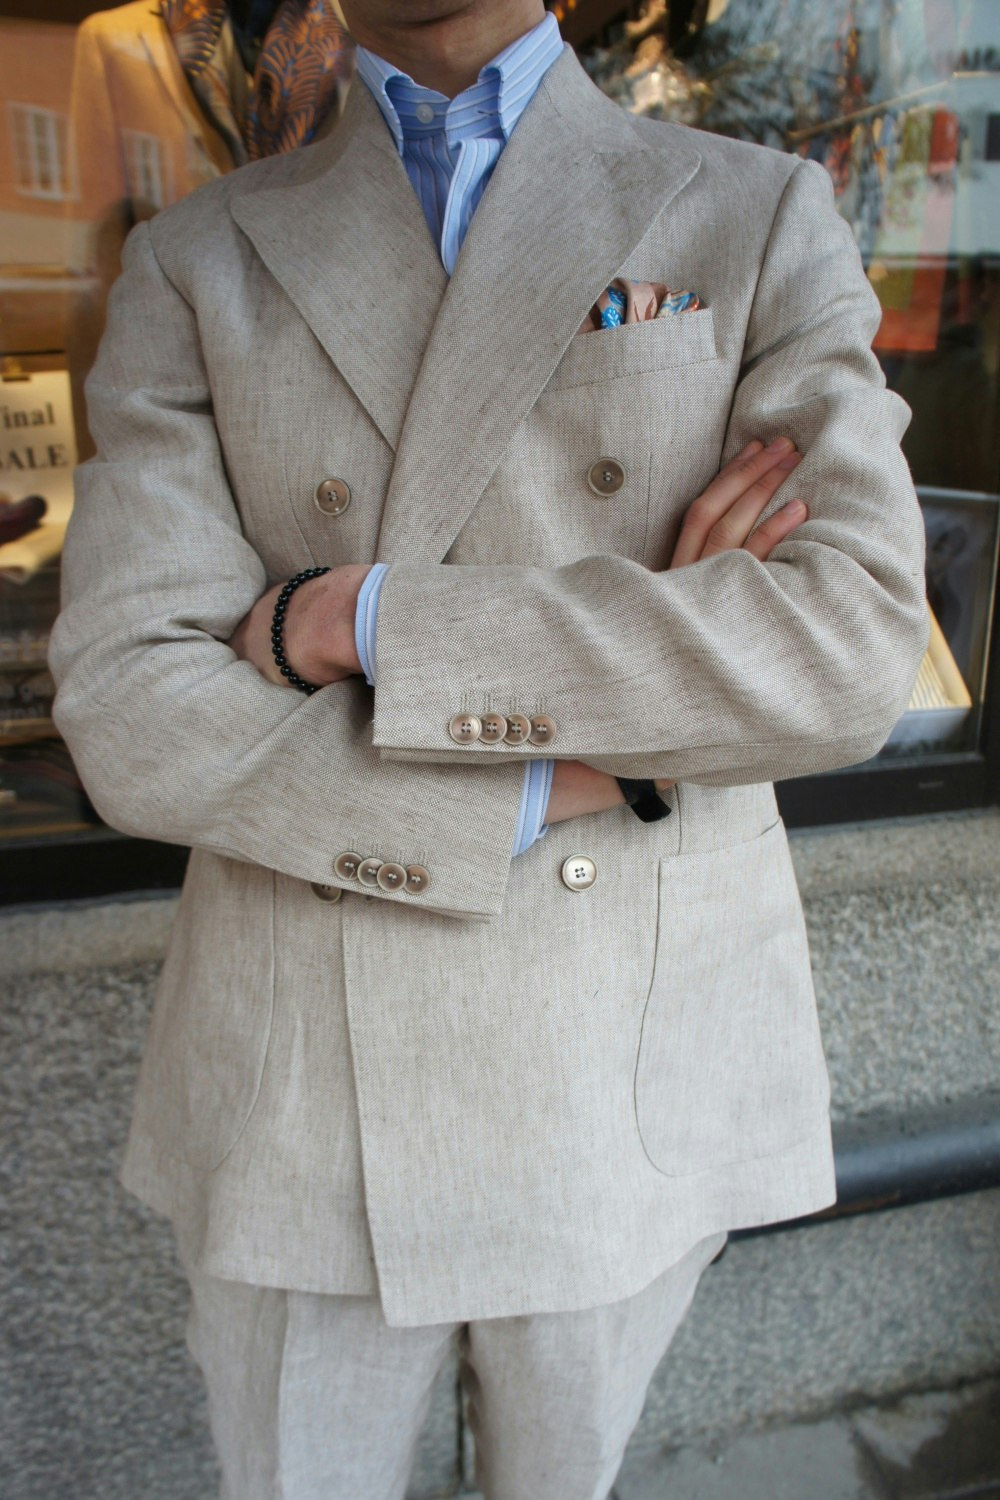 Double Breasted Linen Jacket - Half Canvas - Sand Beige